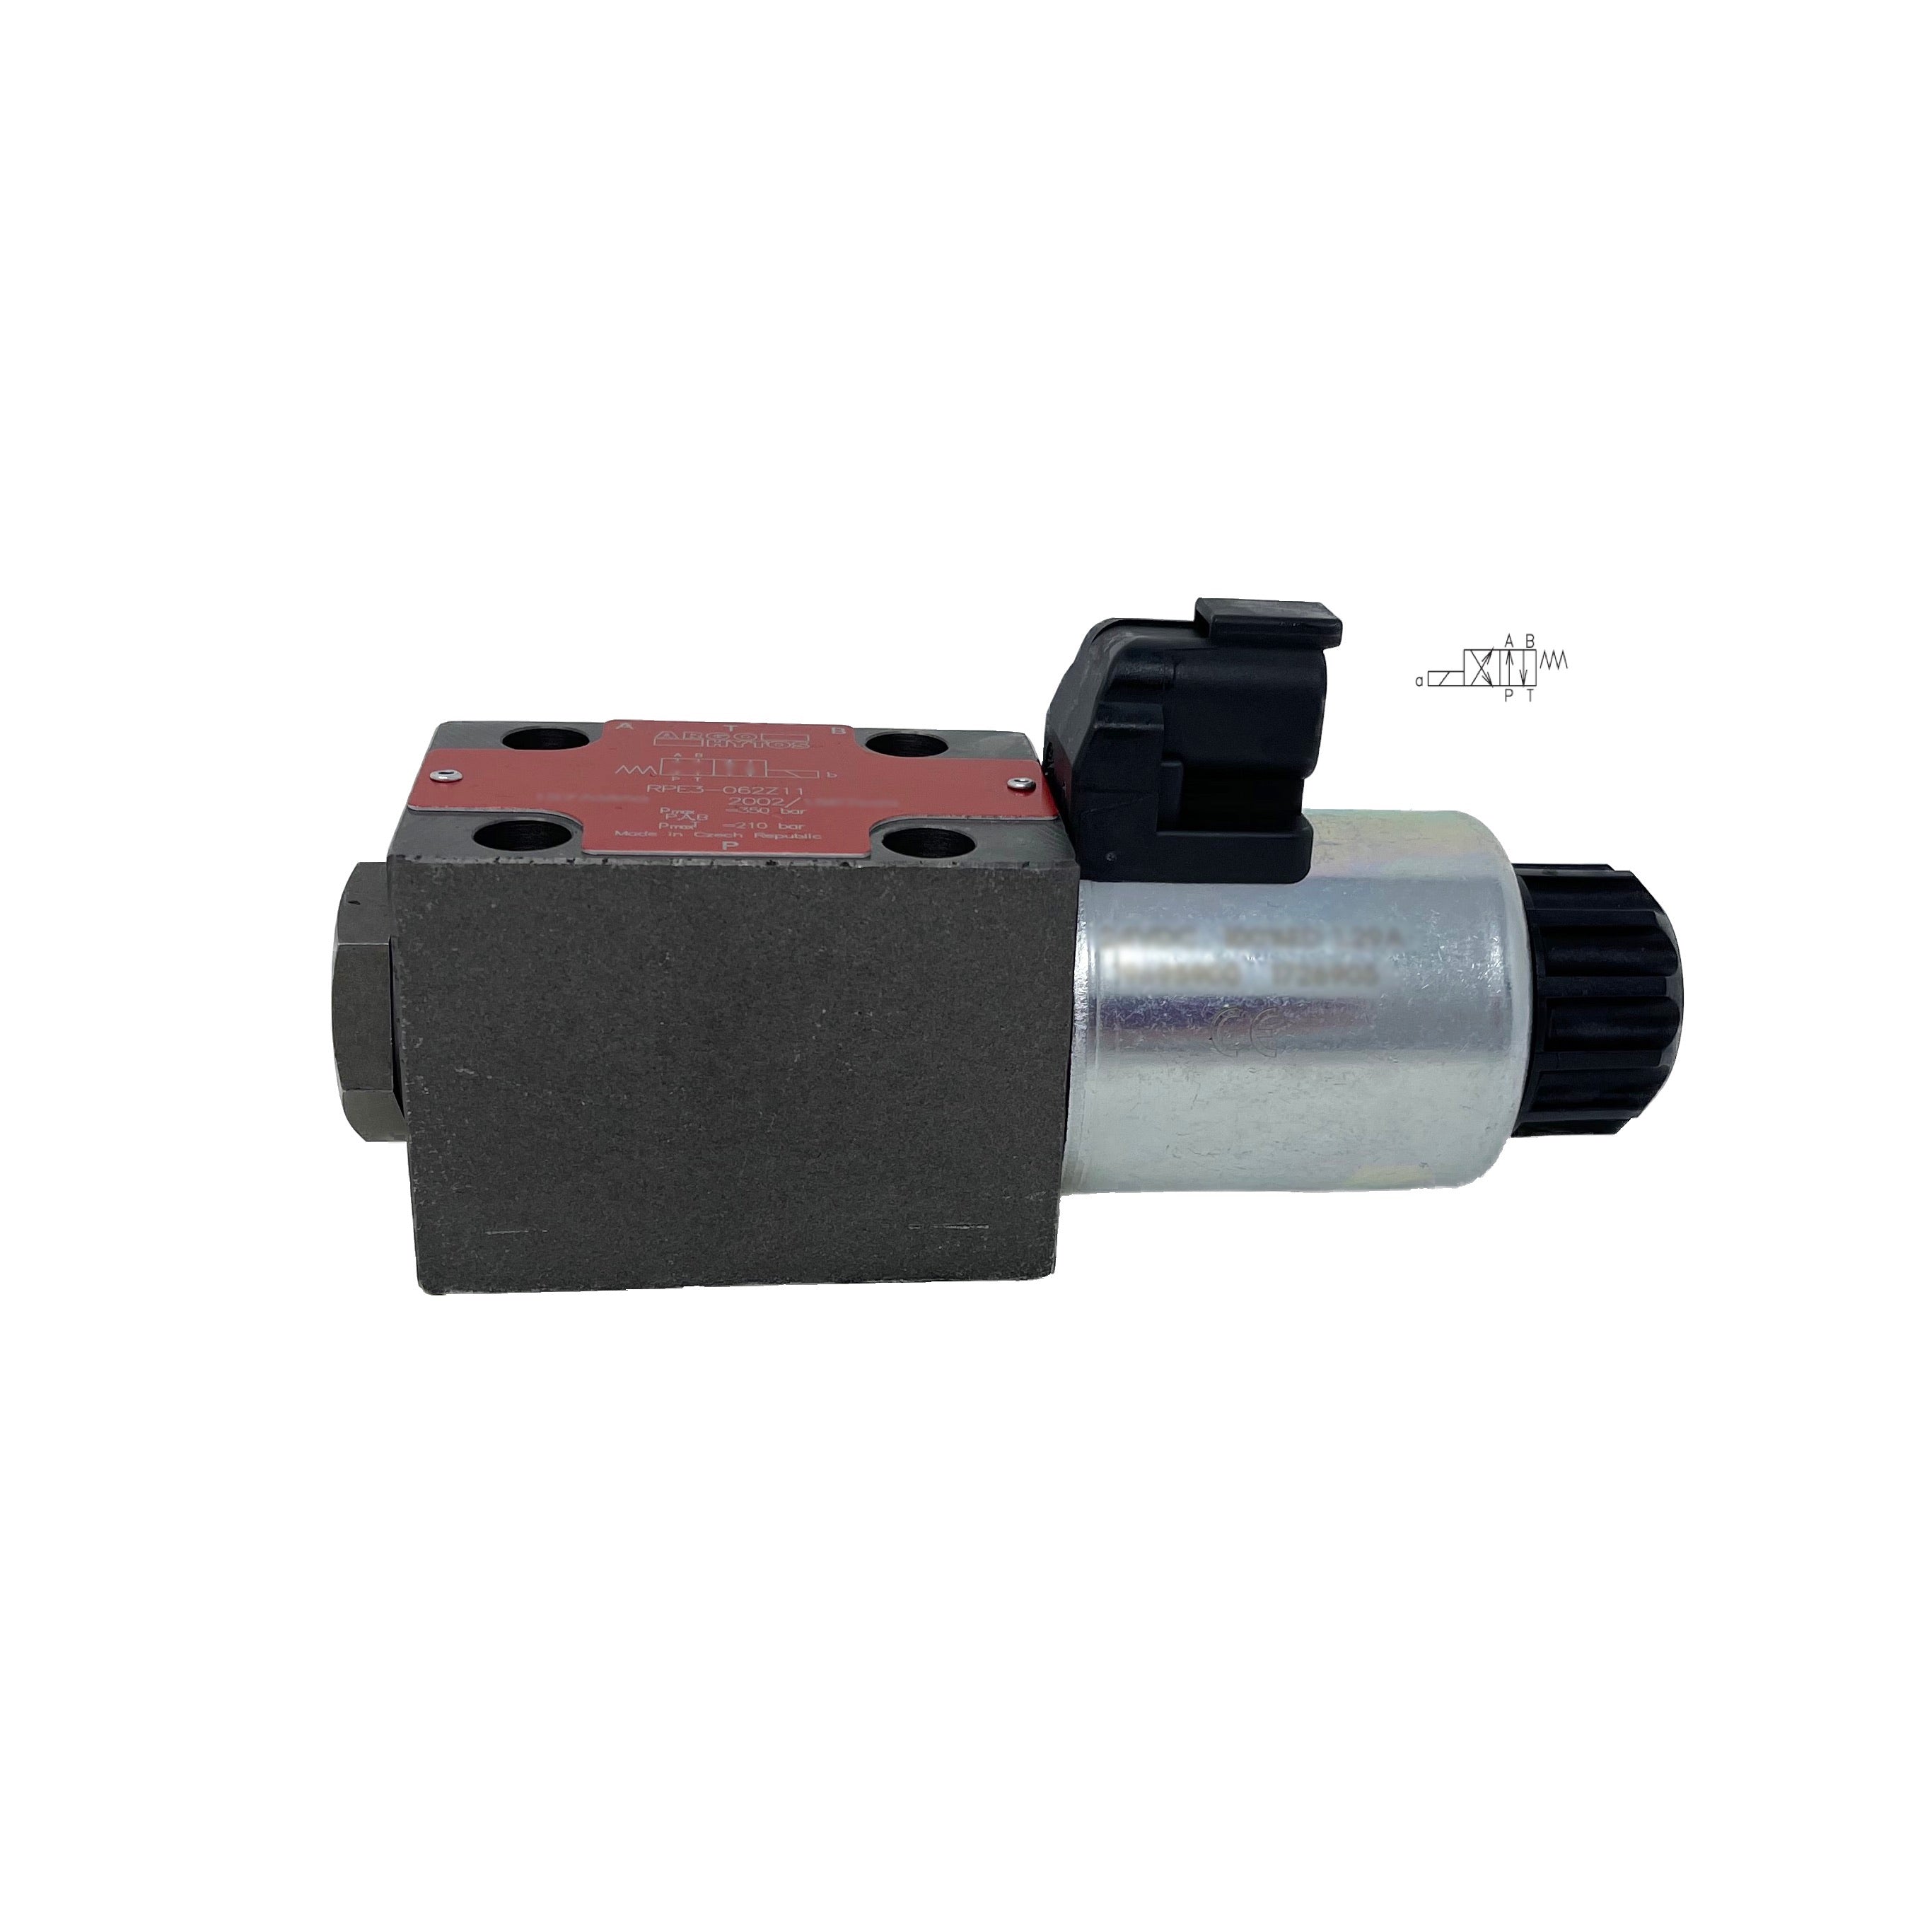 RPE3-062R21/01200E12A : Argo Hytos Directional Control Valve, D03 (NG6), 21GPM, 5100psi, 2P4W, 12 VDC, Deutsch, Spring Return, P to A, B to T in Neutral, Coil Side A